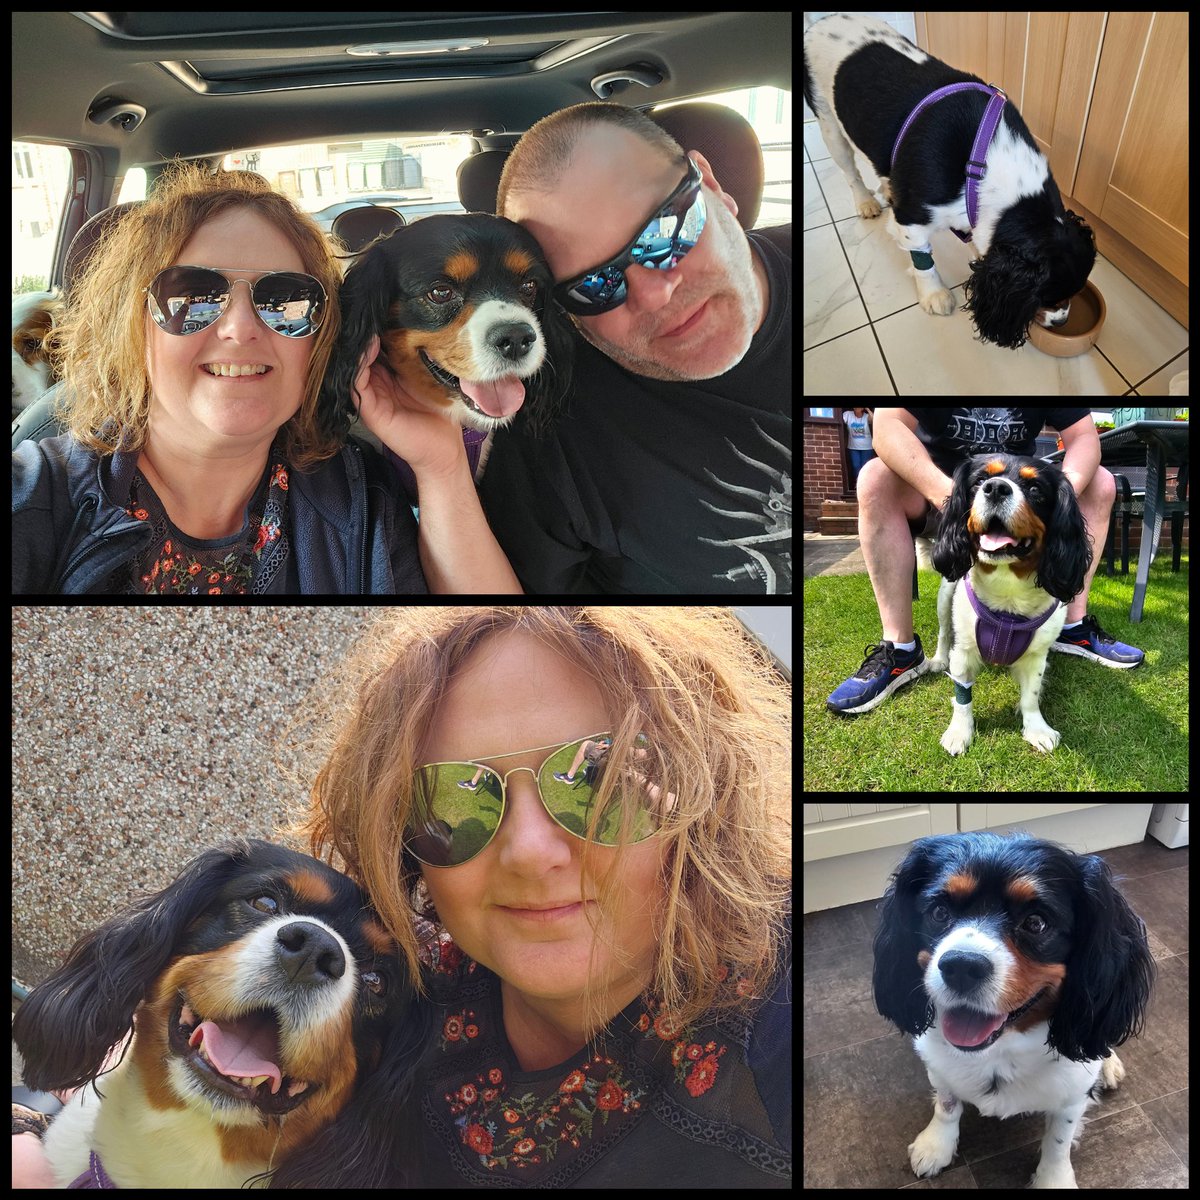 Our boy @Theocav2019 is back home 🥰🥰 We are both so happy and the Moore cavpack is reunited 😄 He's still some recovery to do but much brighter, eating and drinking 🙏 He was so giddy to see us that the vet said it was lovely to see 😍 #cavpack #Happiness